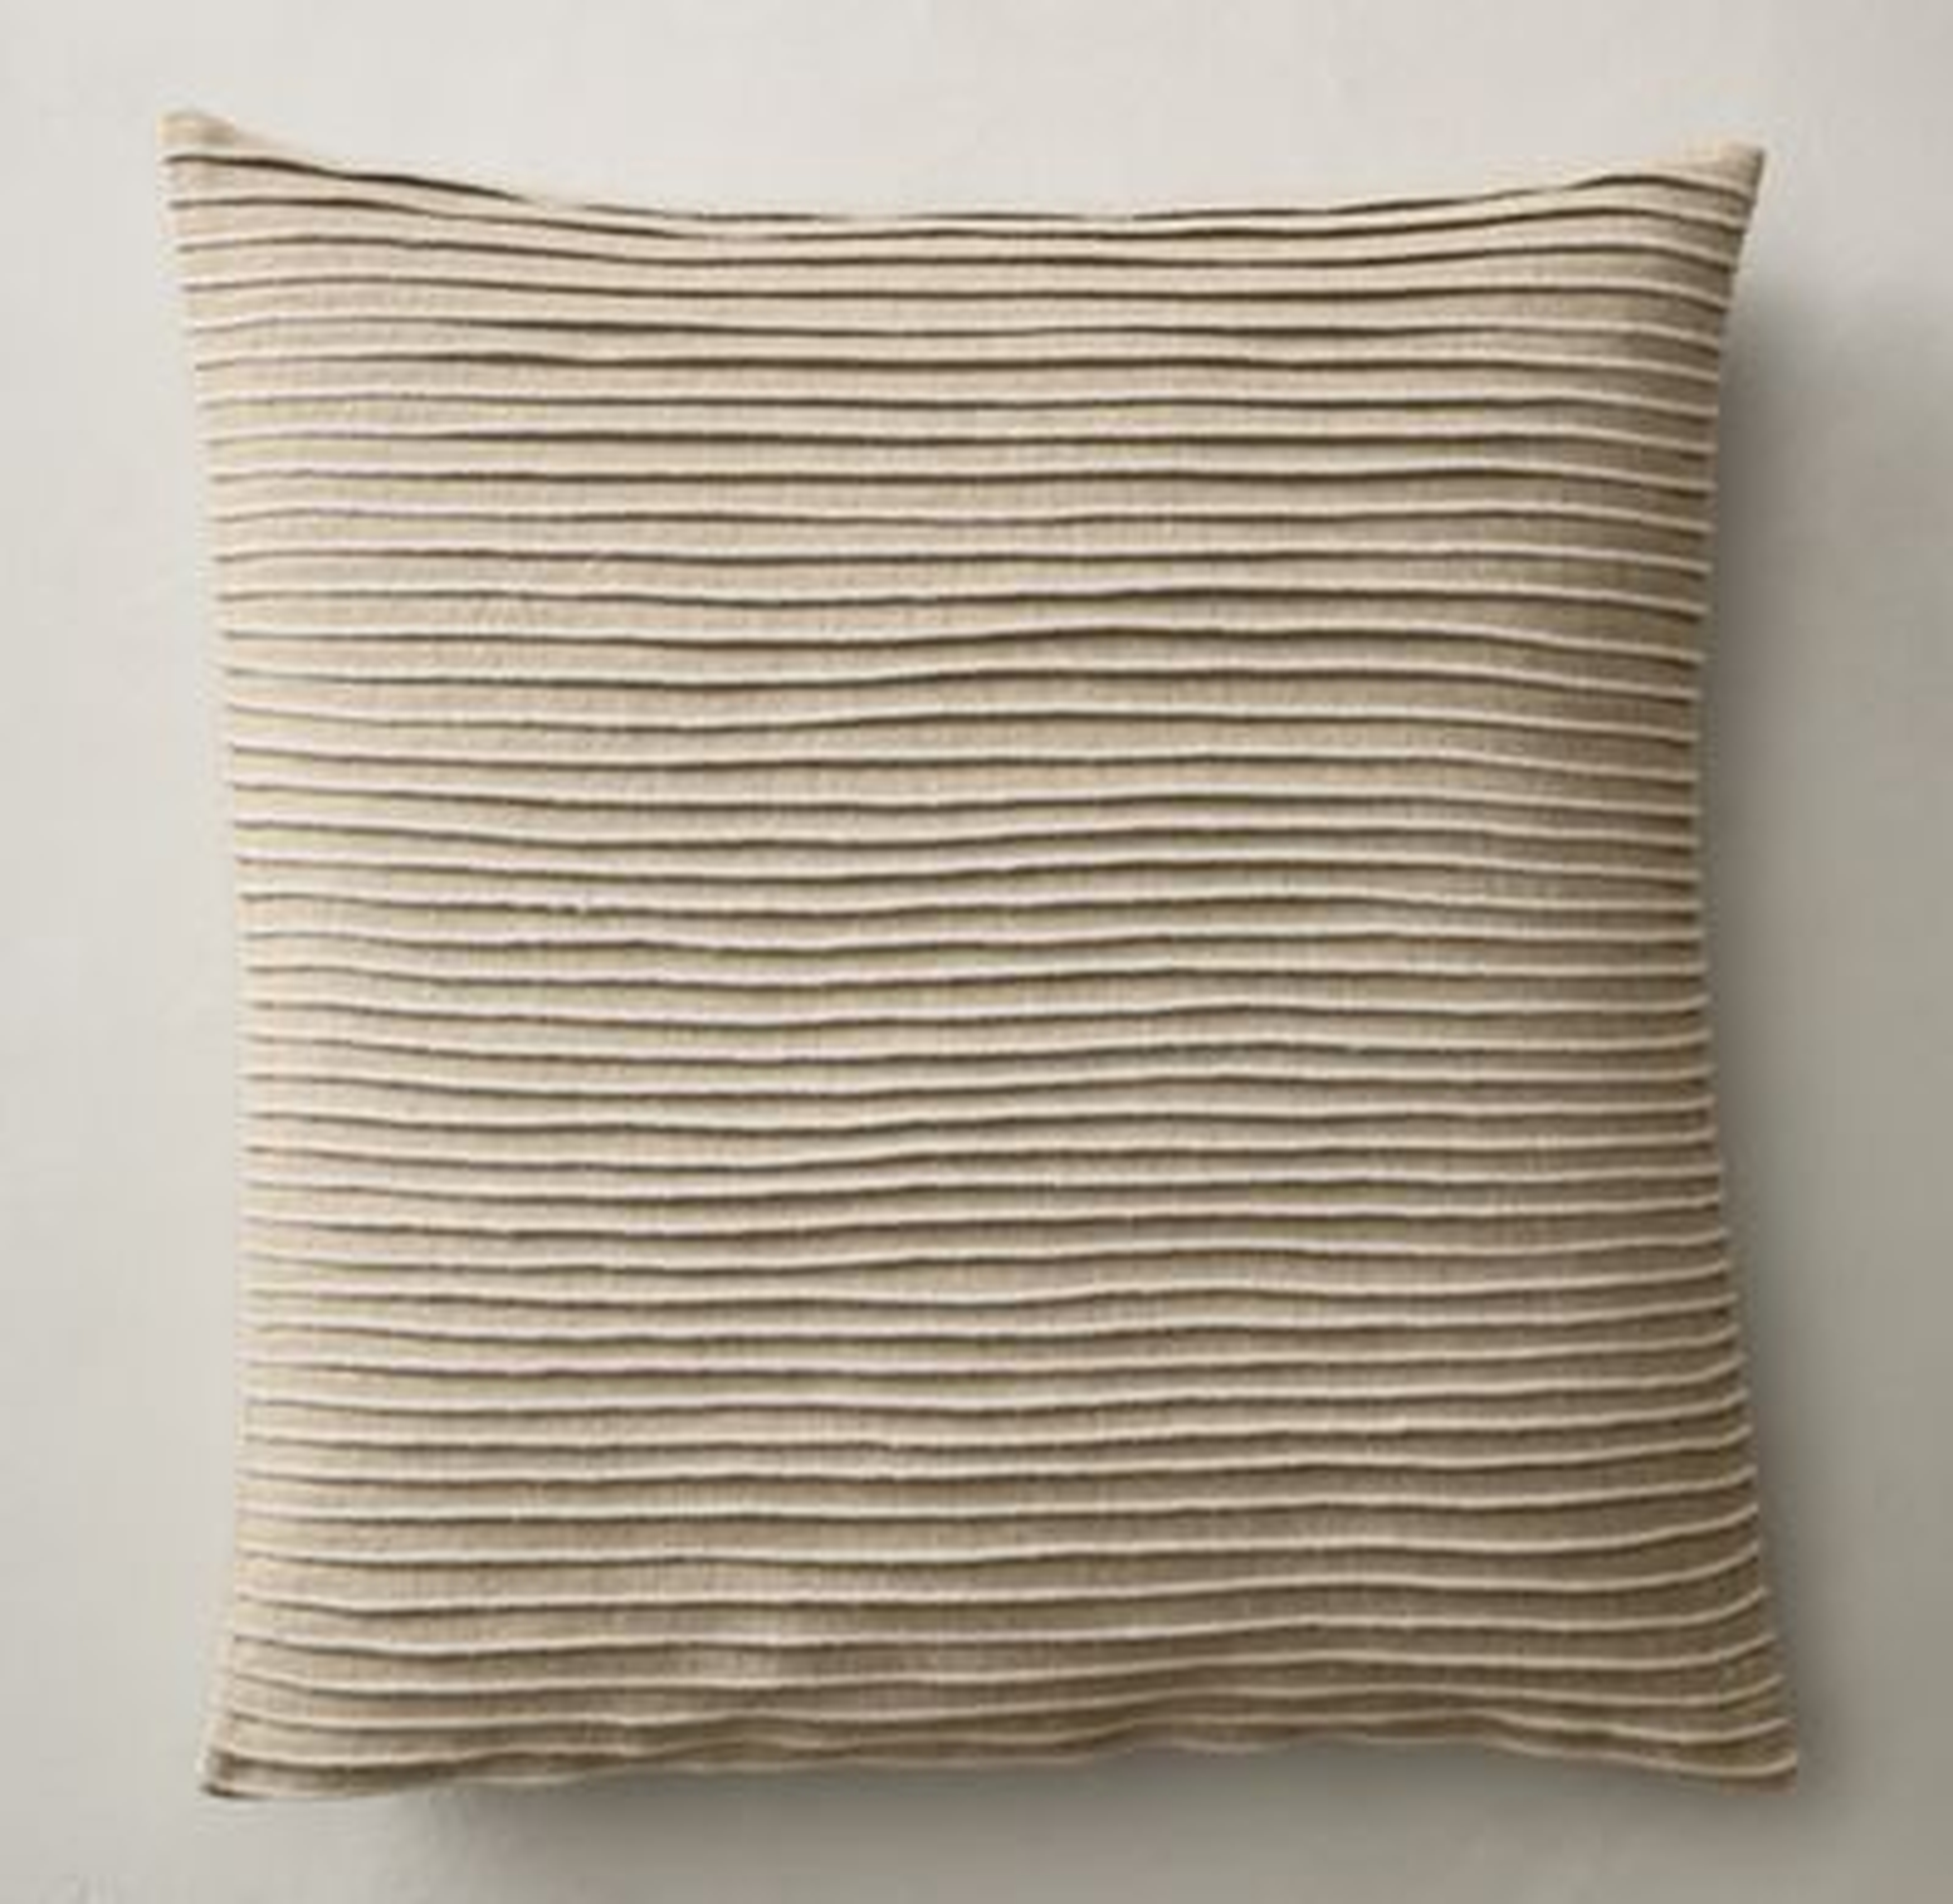 PLEATED LINEN PILLOW COVER - 22" x 22" - Ivory - Insert sold separately - RH